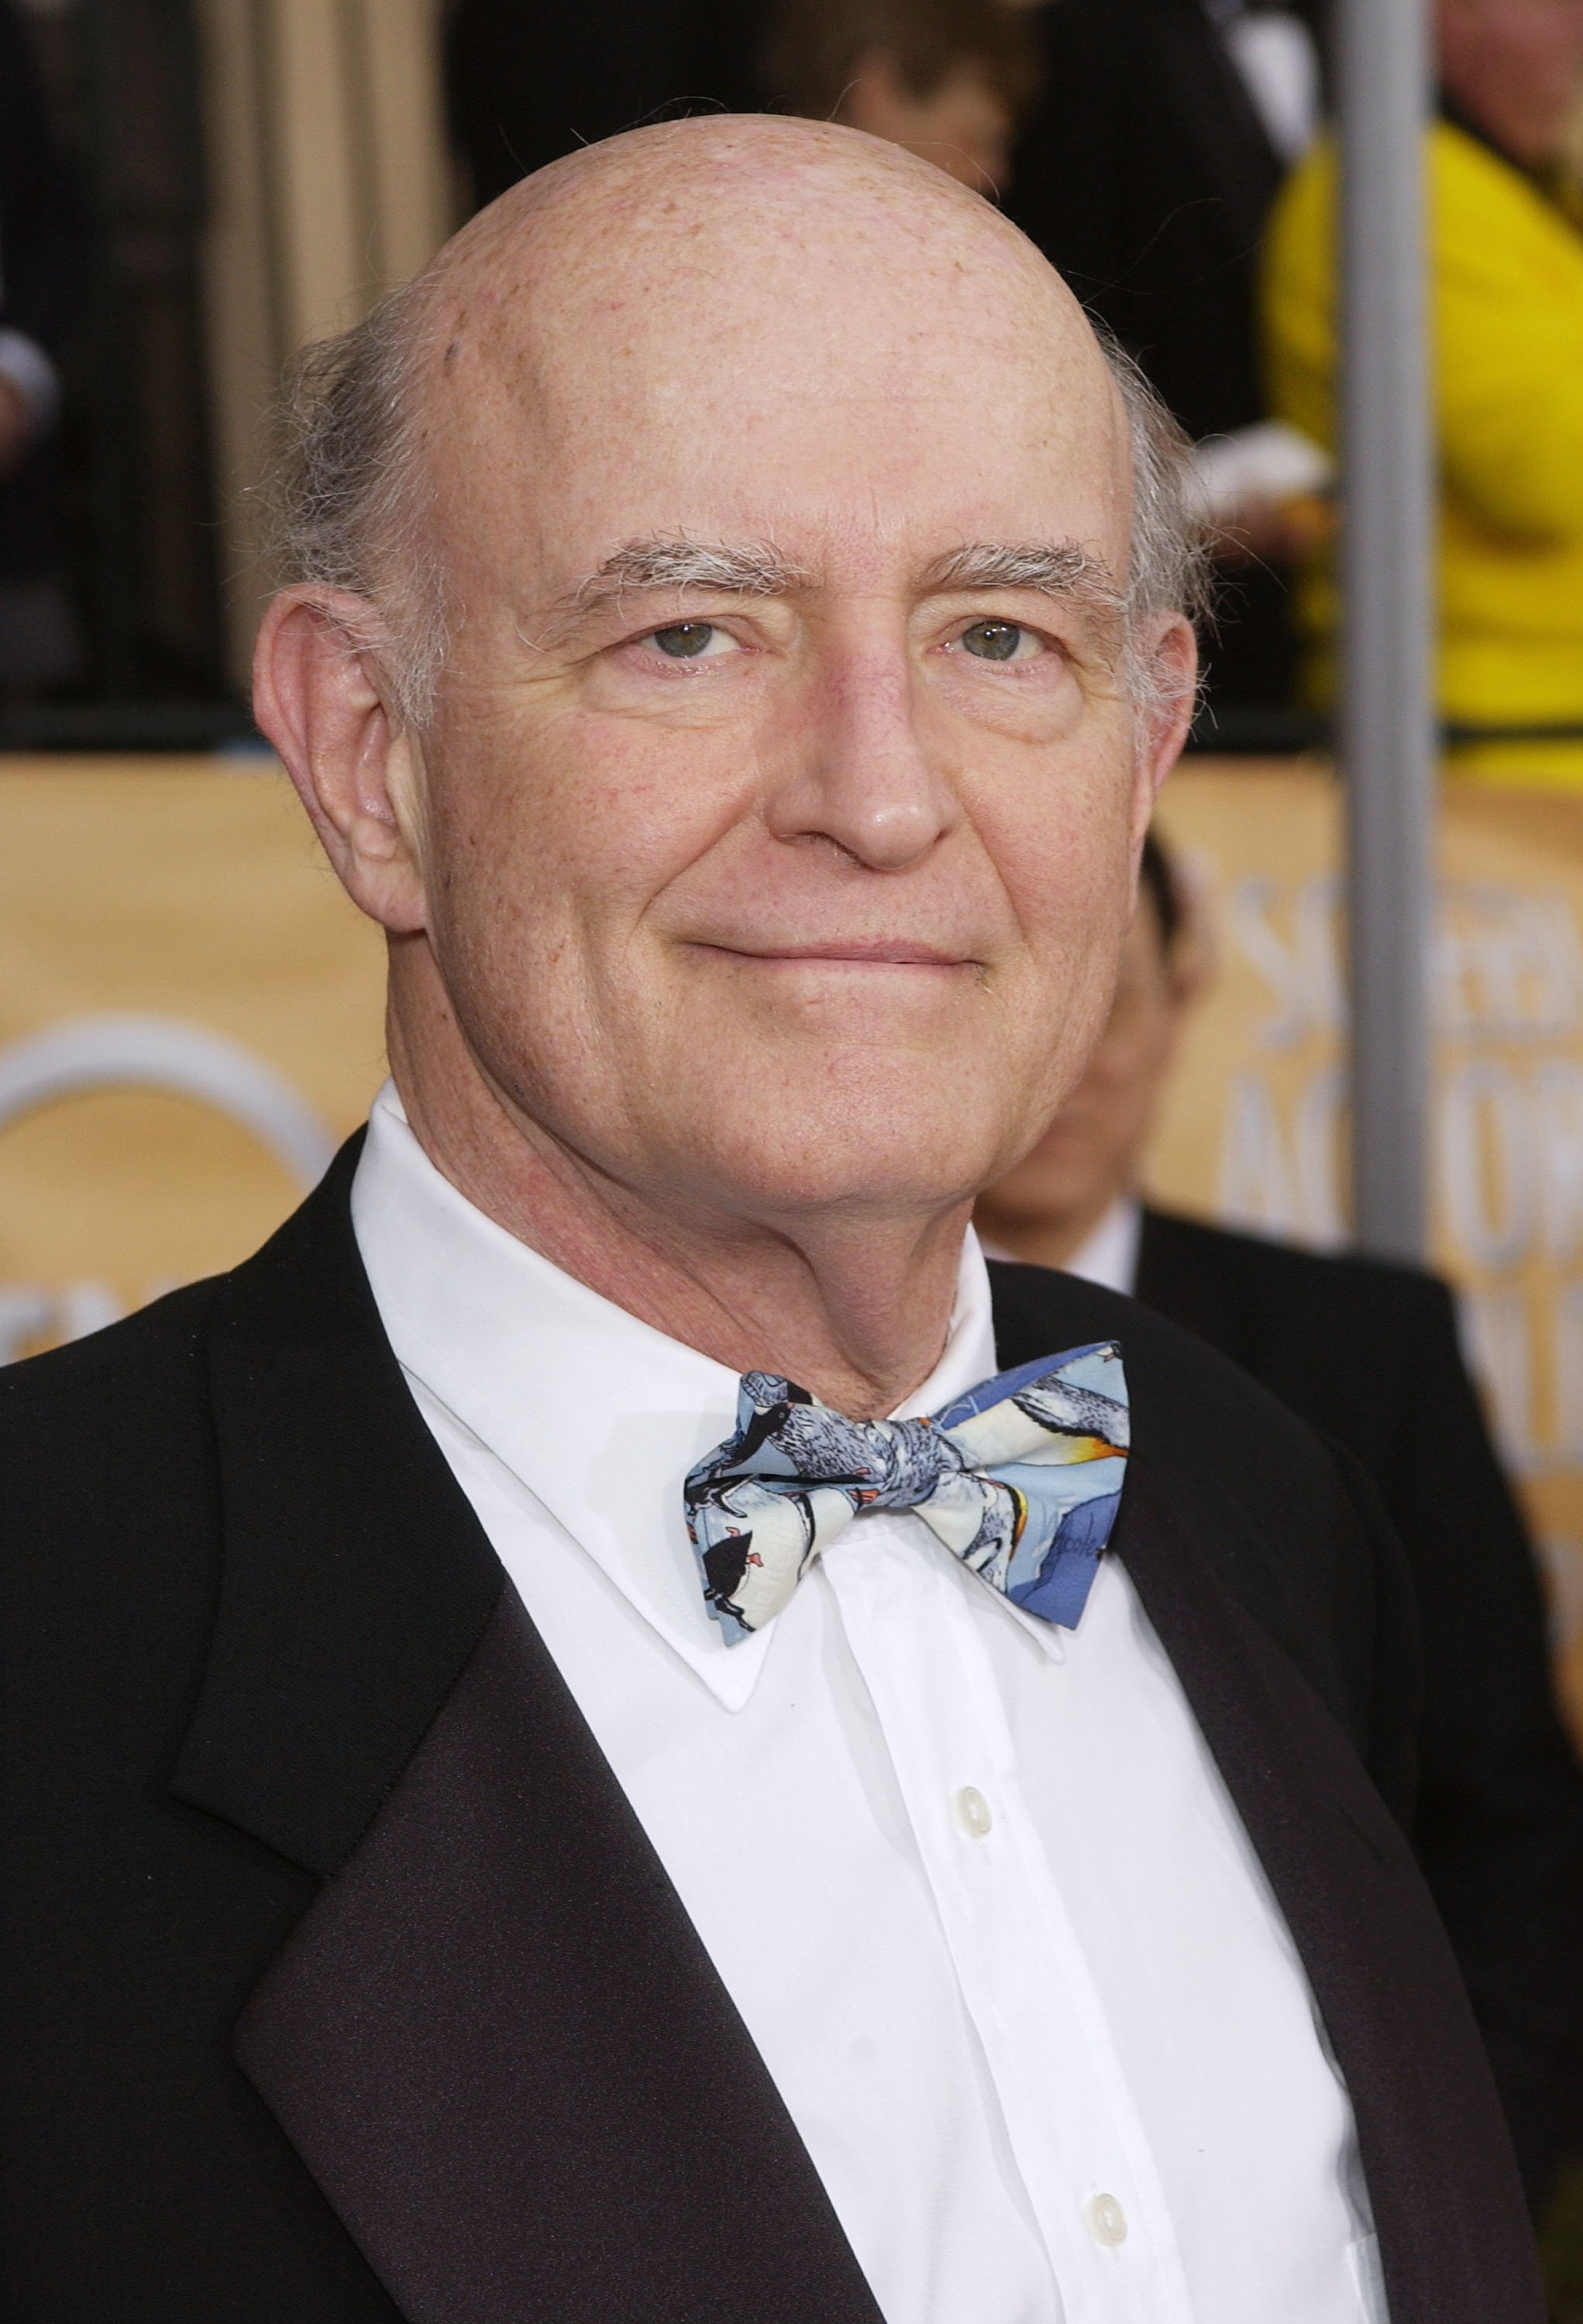 Peter Boyle at the 10th Annual Screen Actors Guild Awards on Feb. 22, 2004 in California | Photo: Getty Images